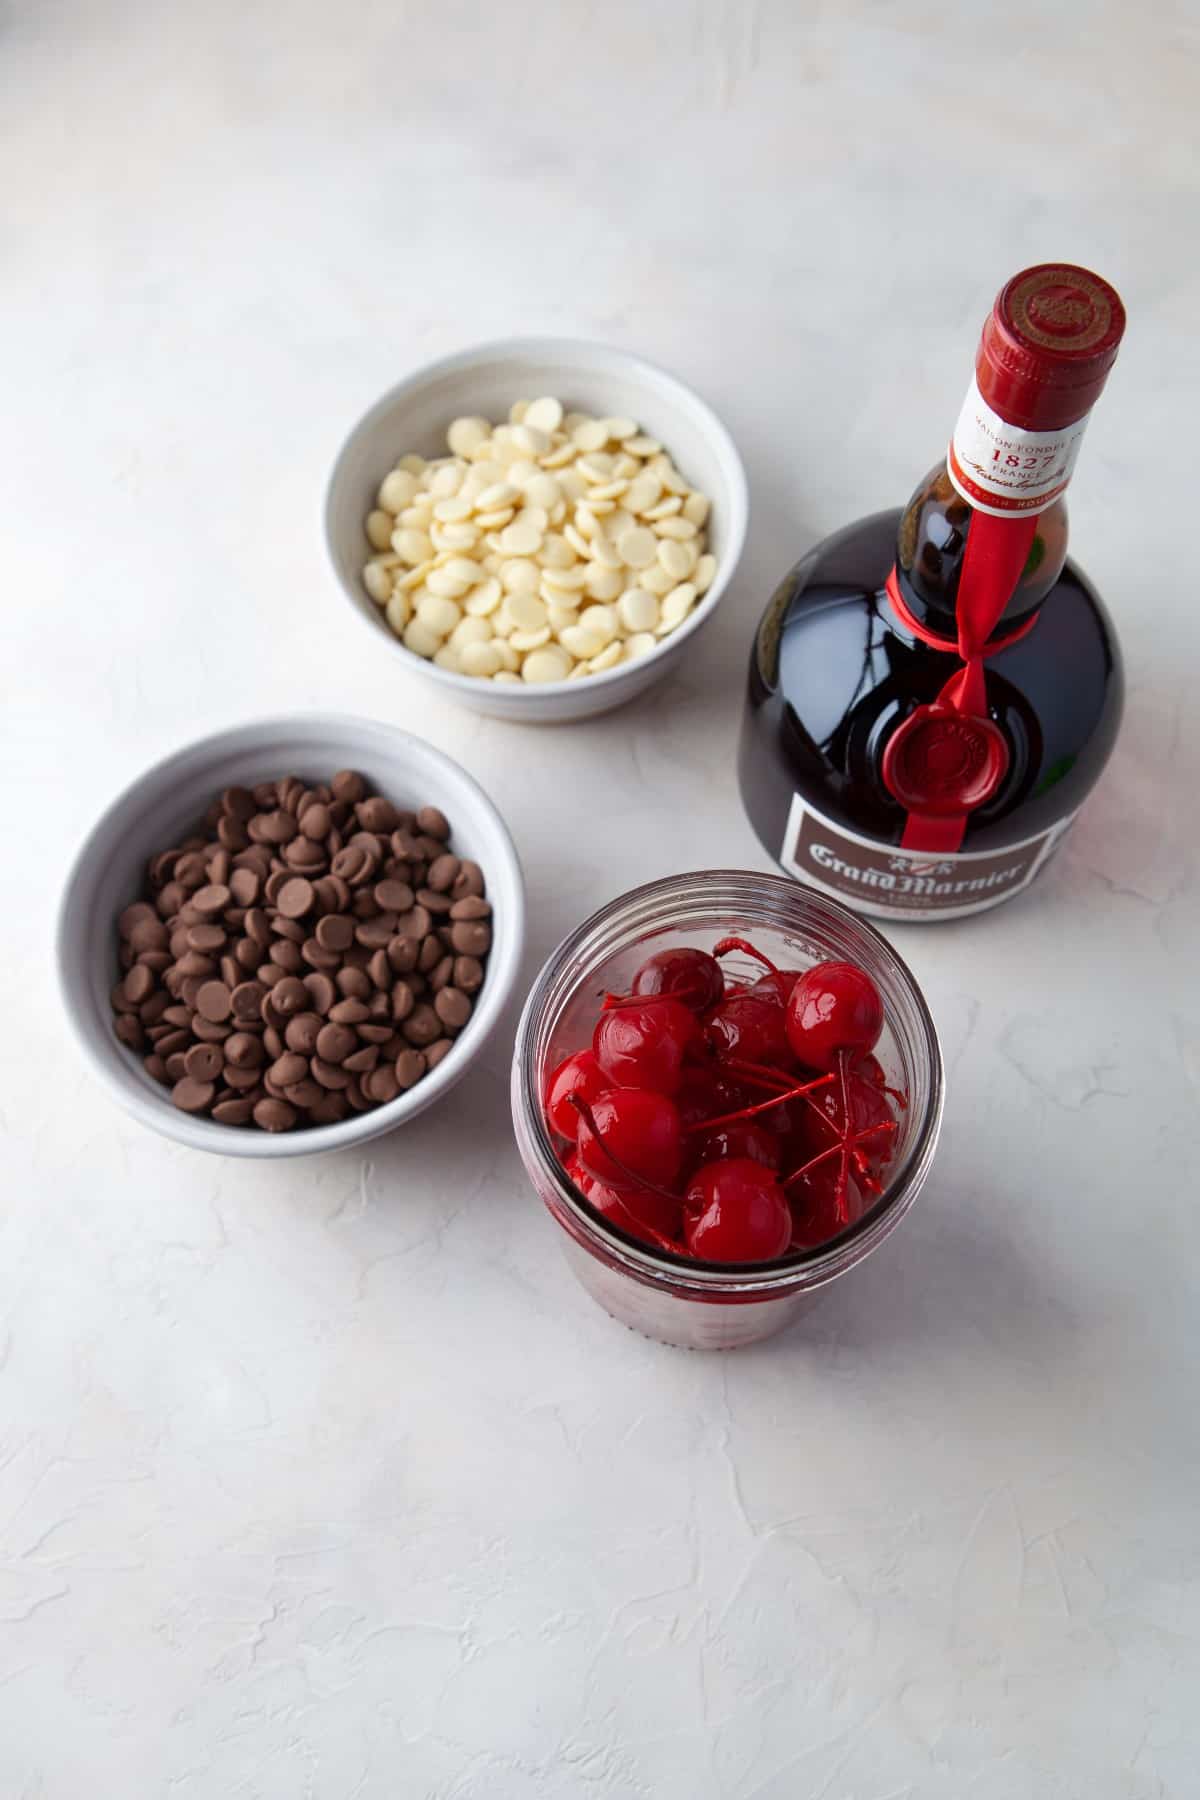 Ingredients for Grand Marnier Chocolate Cherries on a white countertop.